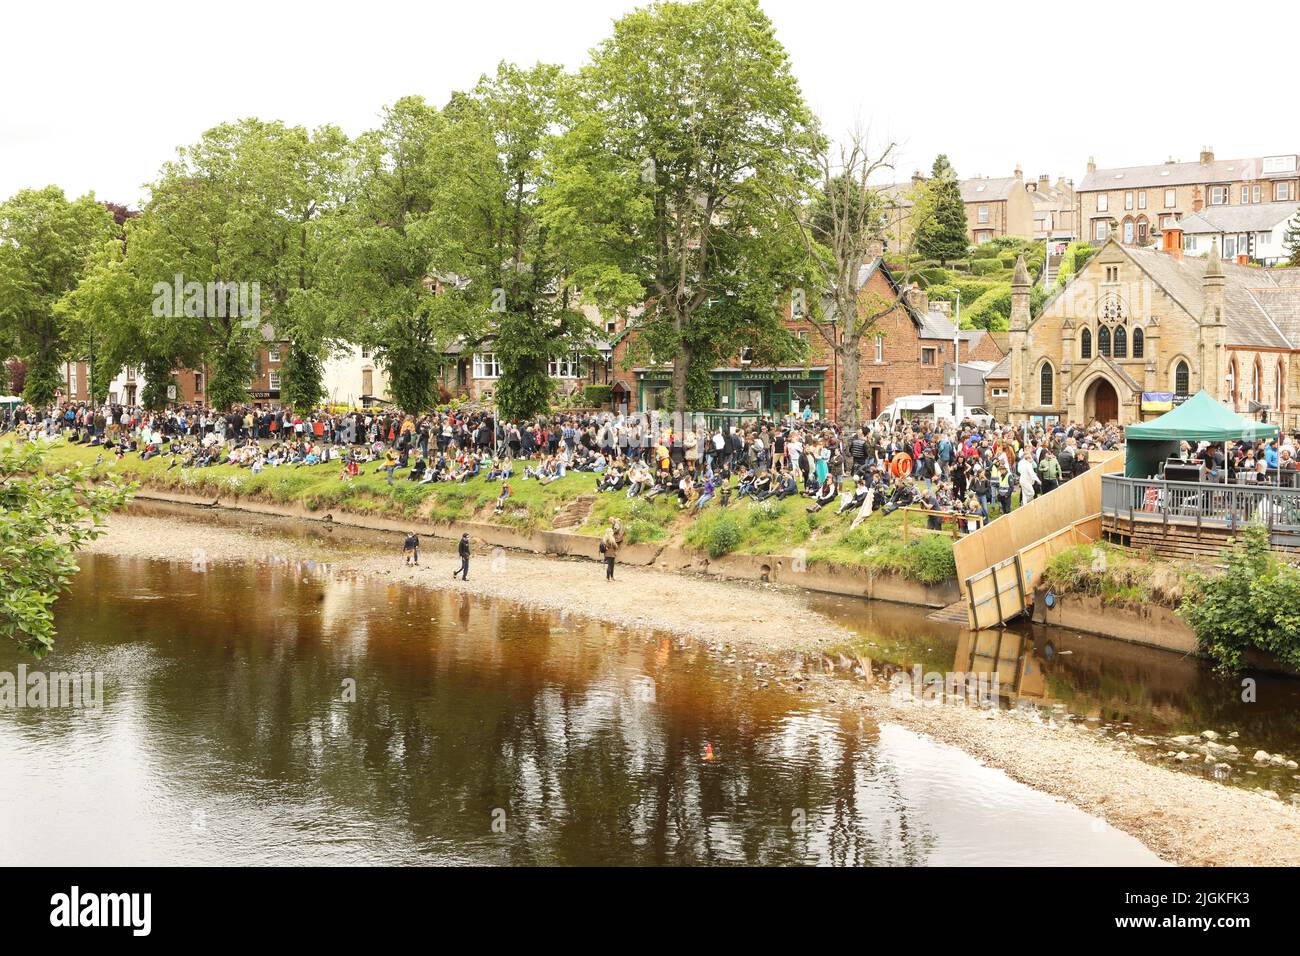 People gathered on the banks of the River Eden watching horses, Appleby Horse Fair, Appleby in Westmorland, Cumbria Stock Photo